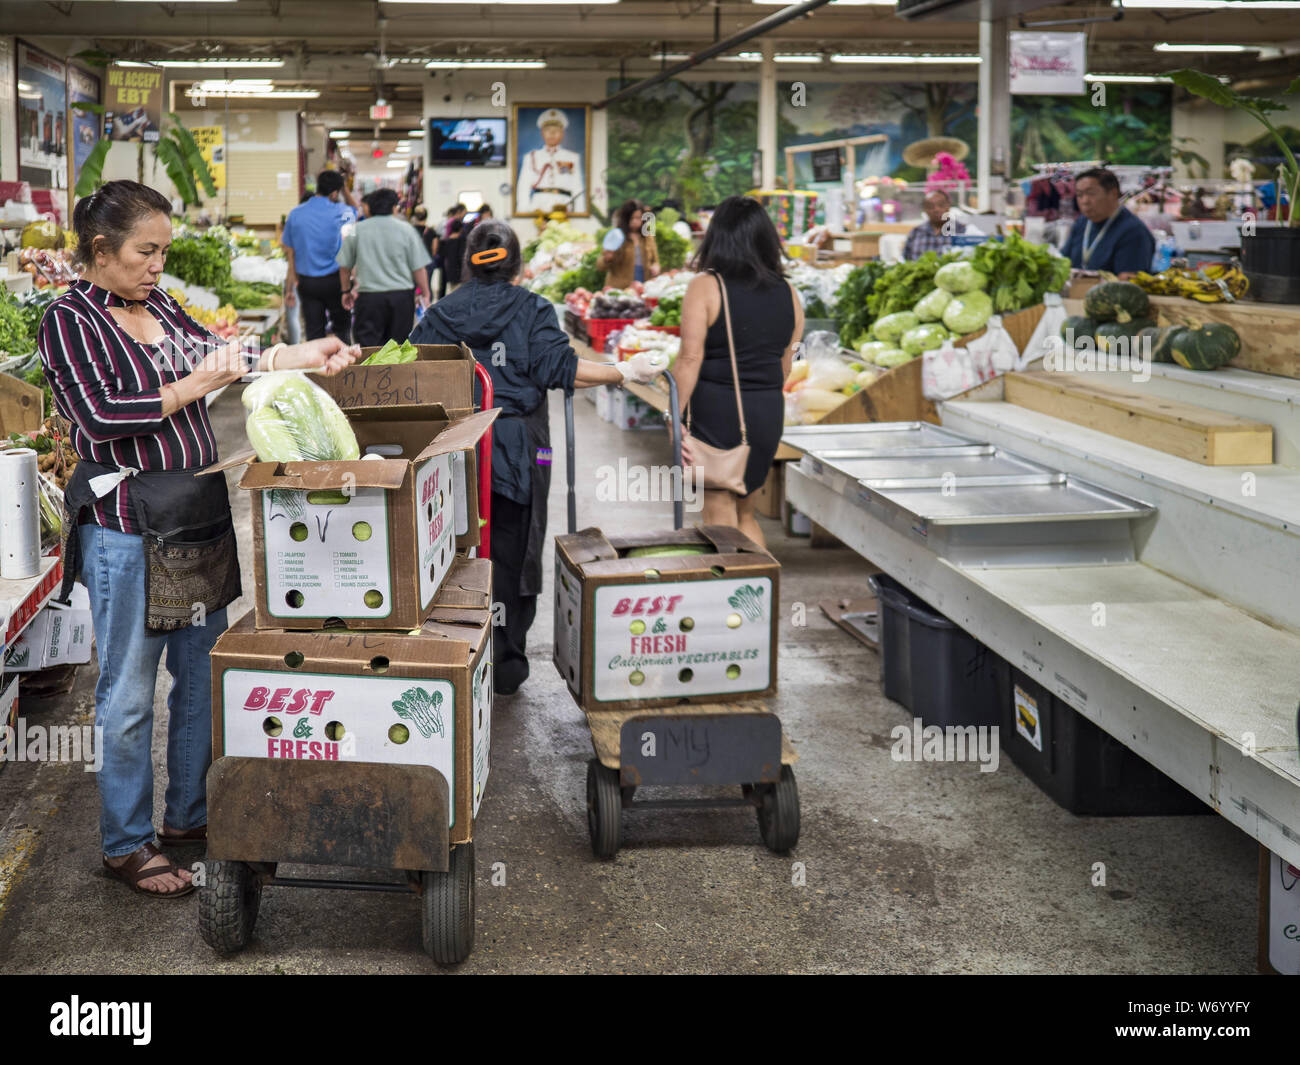 St. Paul, Minnesota, USA. 3rd Aug, 2019. The farmers' market in the Hmong Village shopping center. Thousands of Hmong people, originally from the mountains of central Laos, settled in the Twin Cities in the late 1970s and early 1980s. Most were refugees displaced by the American war in Southeast Asia. According to the 2010 U.S. Census, there are now 66,000 ethnic Hmong in the Minneapolis-St. Paul area, making it the largest urban Hmong population in the world. There are two large Hmong markers in St. Paul. The Hmongtown Marketplace has are more than 125 shops, 11 restaurants, and a farmers' Stock Photo